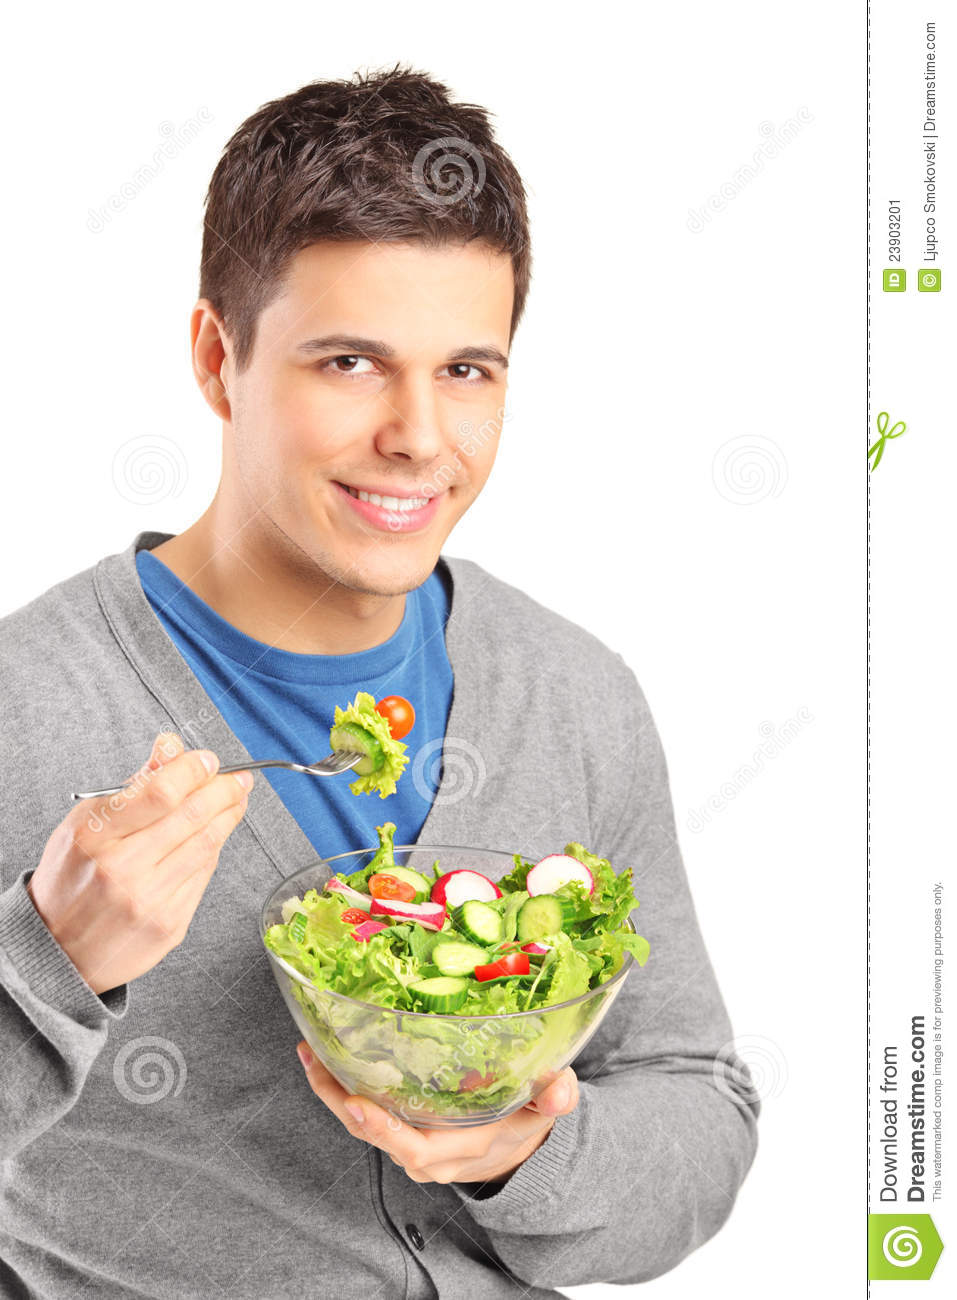 Man about to eat a forkfull of salad, smiles softly to camera